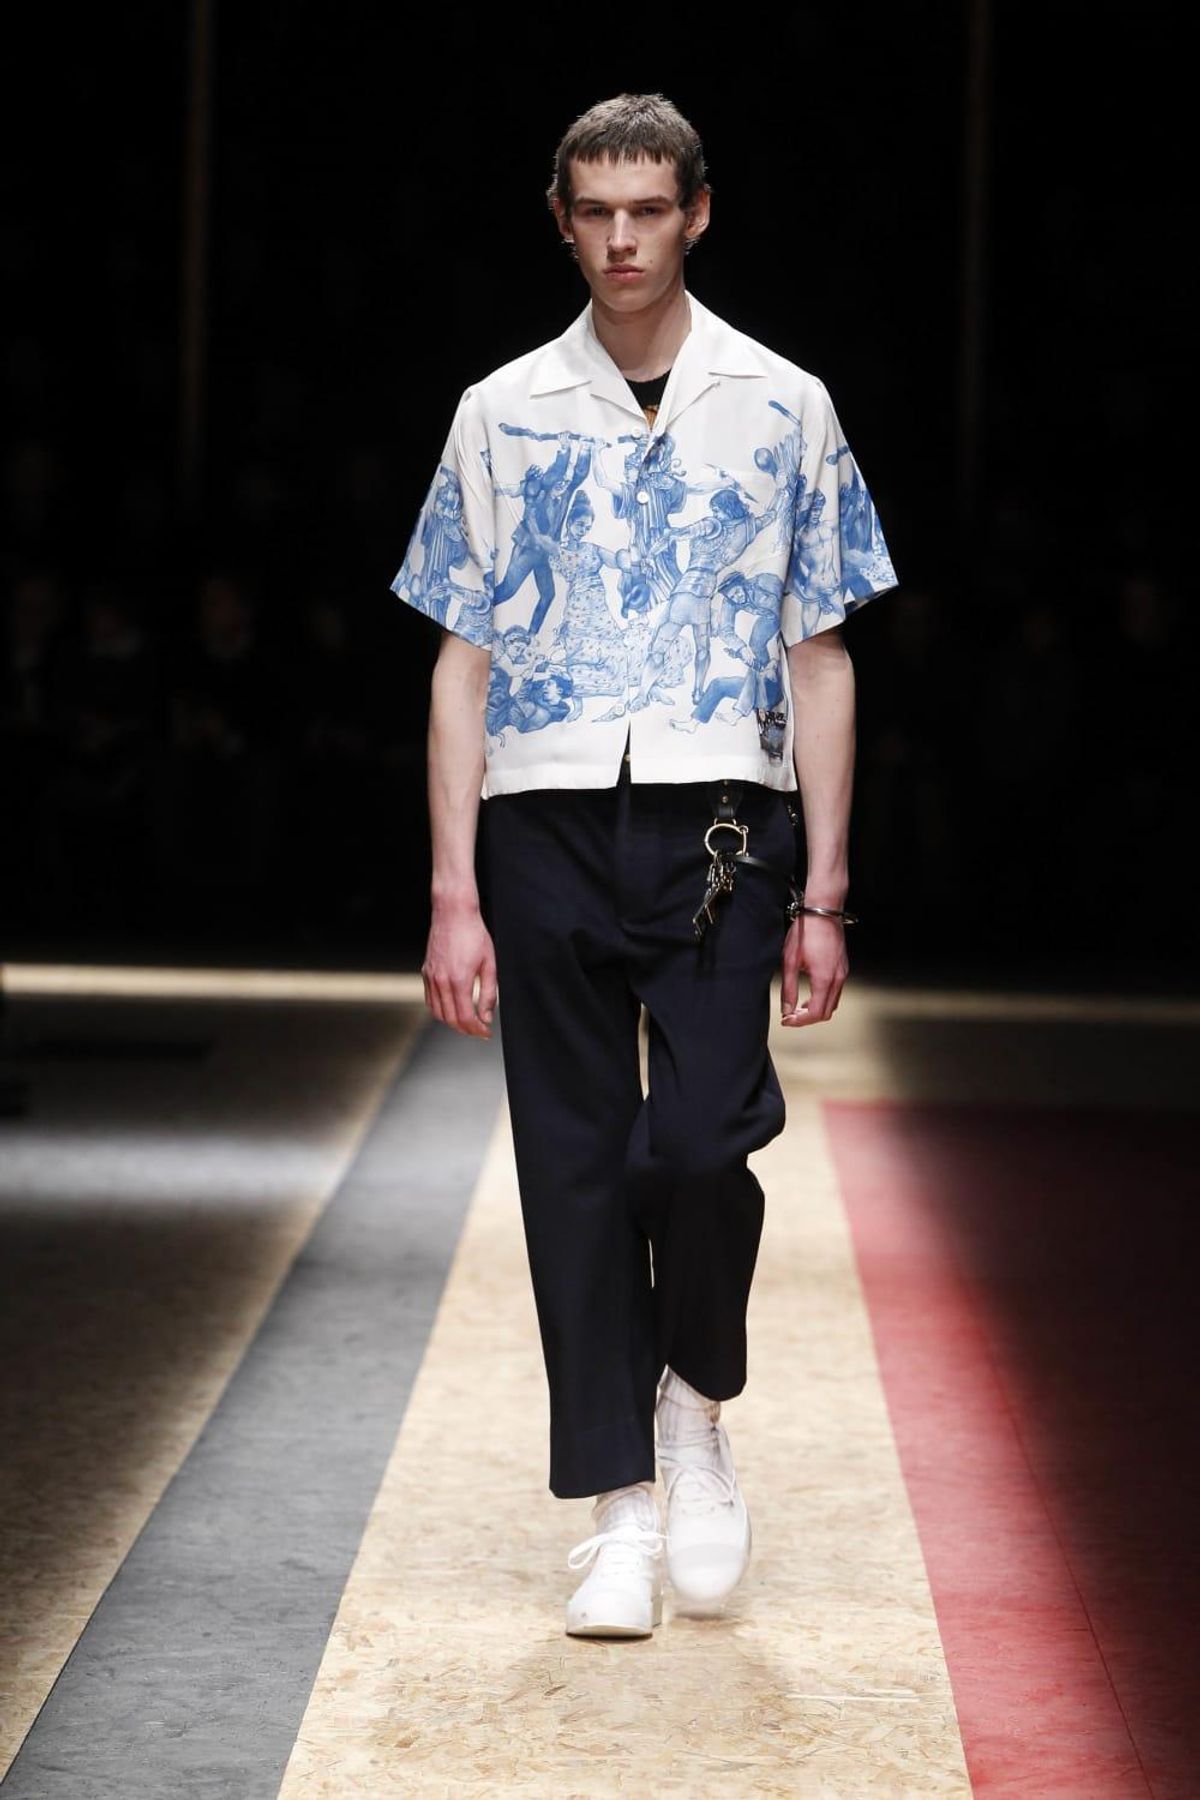 The Prada fall menswear collection features intricate prints by Berlin  artist Christophe Chemin. - CultureMap Houston